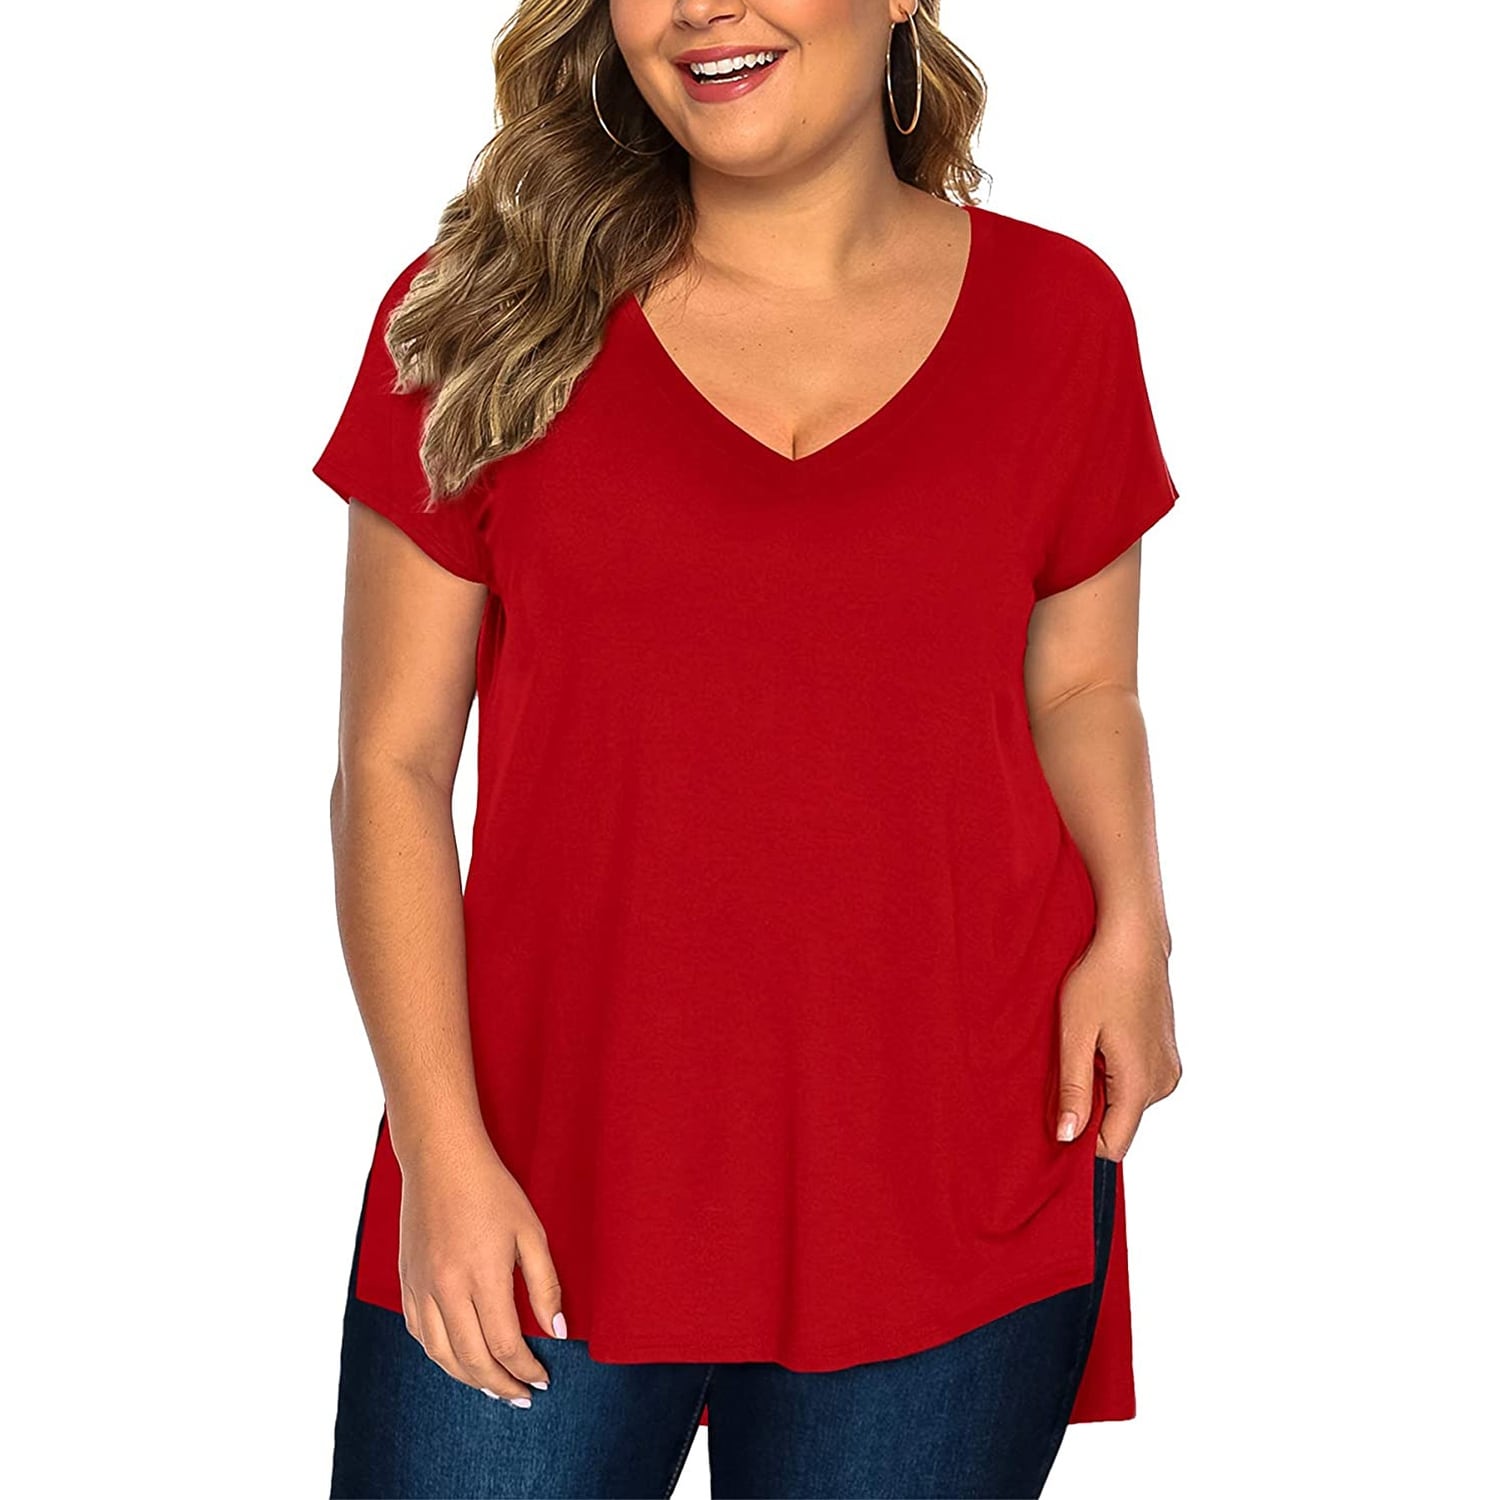 Haoricu Plus Size Womens Short Sleeve Casual Loose Fit Flare Swing Tunic Tops Basic T-Shirt Loose V-Neck Tunic Top